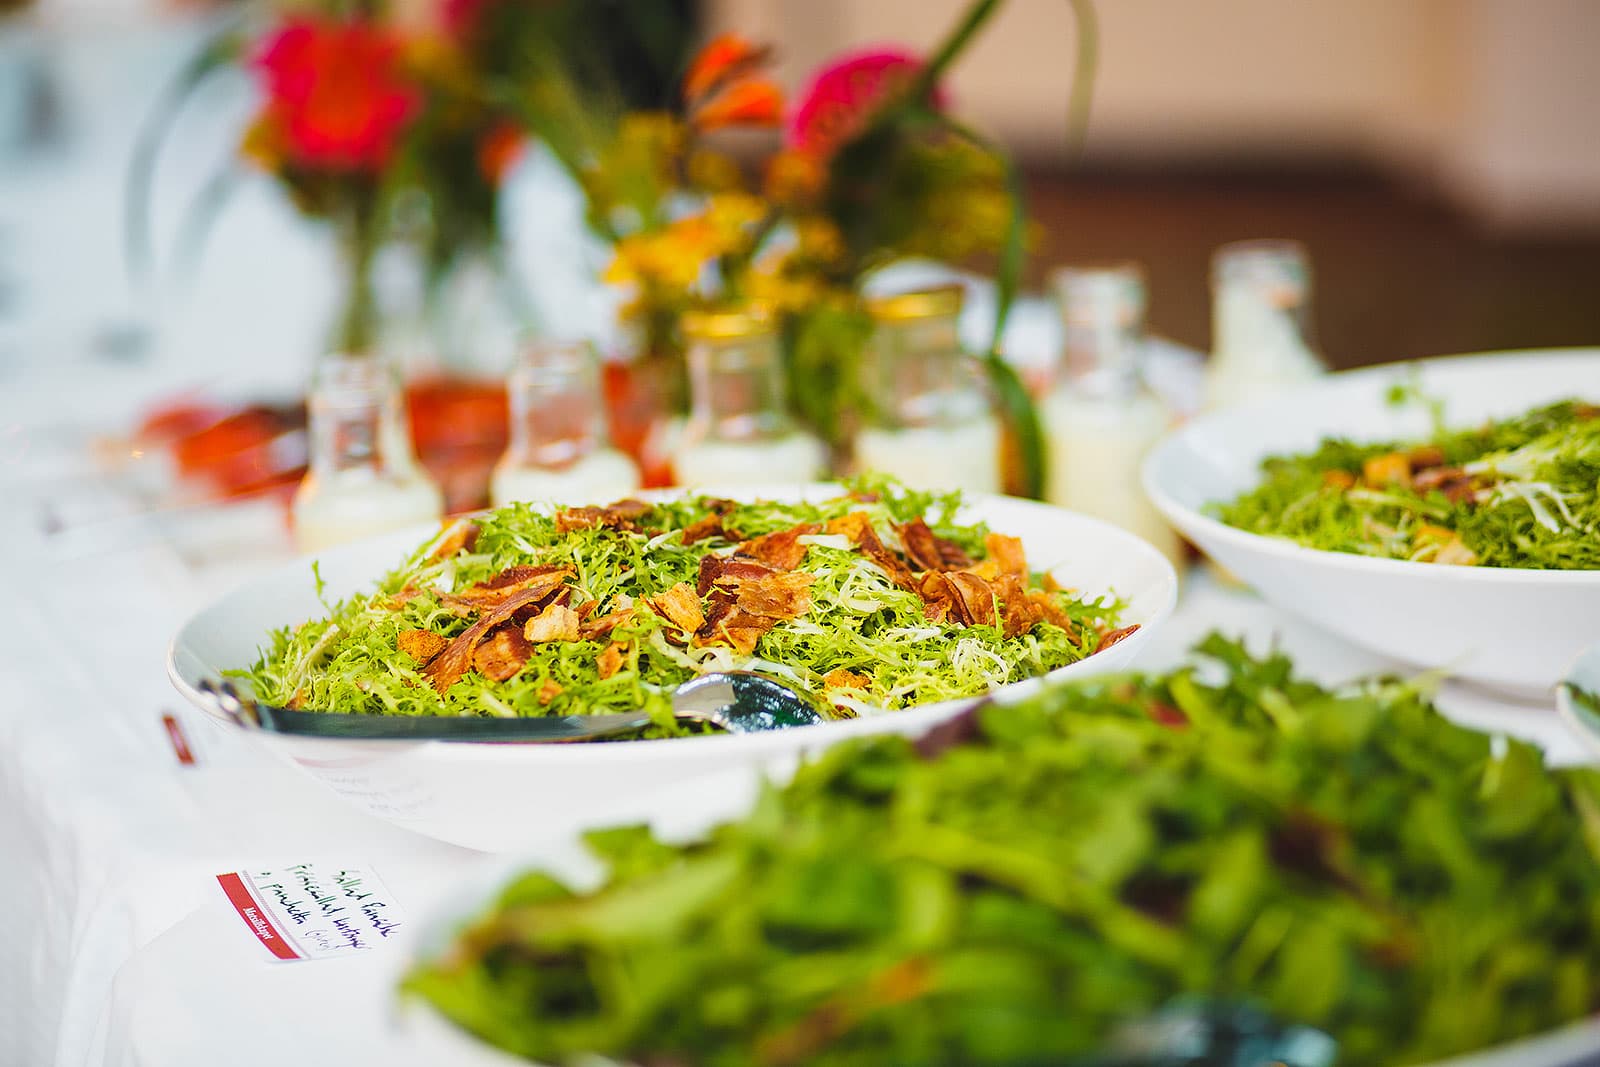 Stockholm's best catering companies